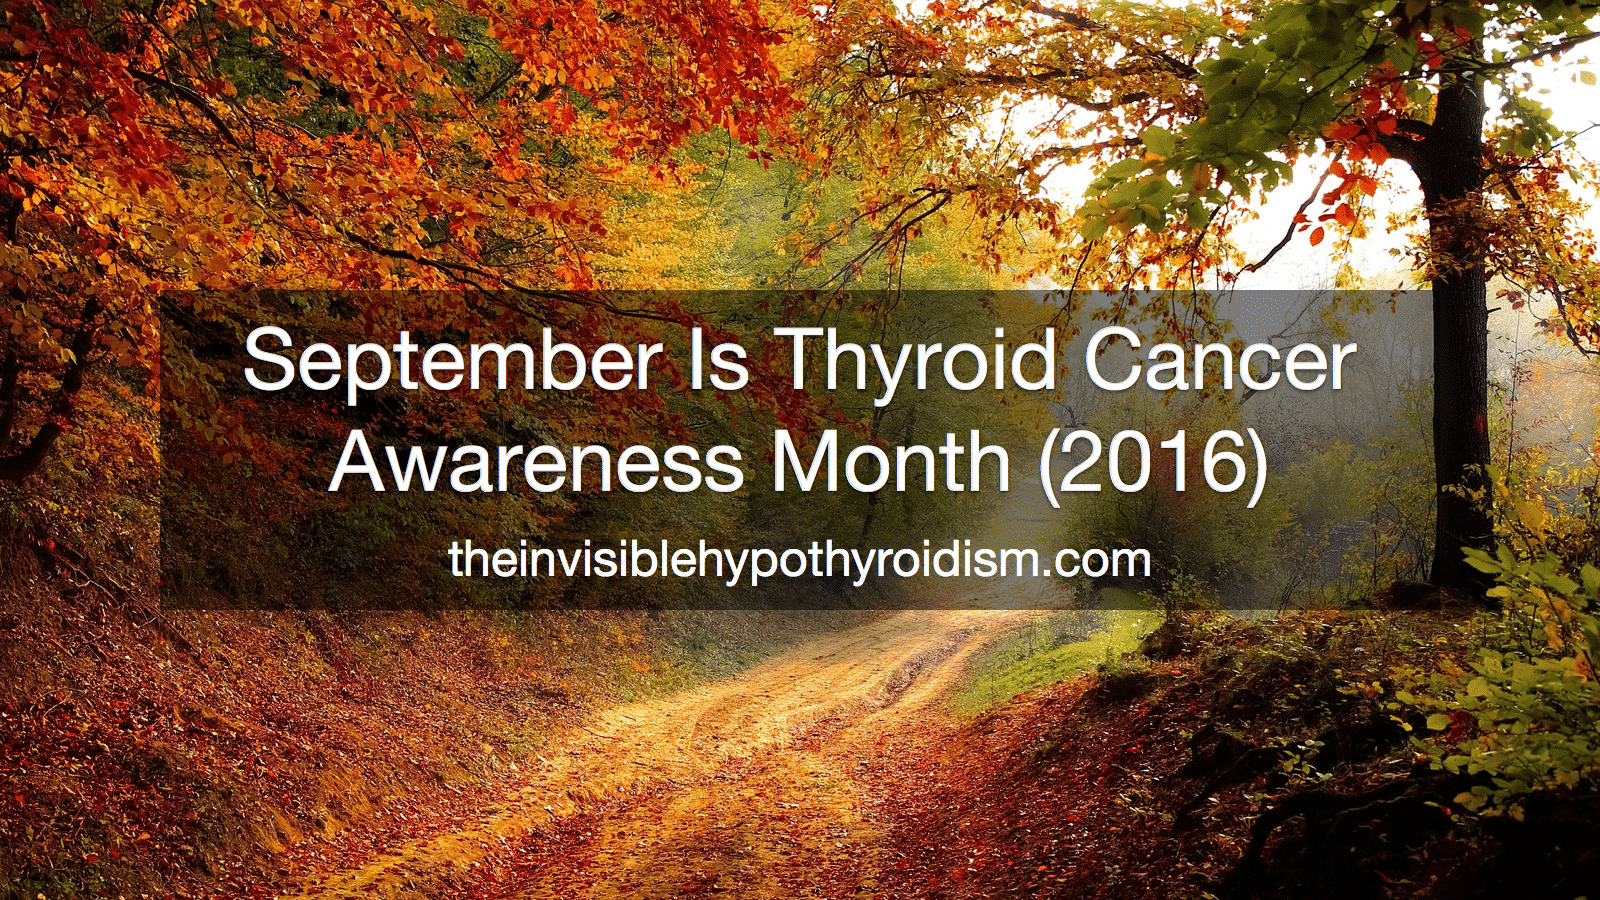 September Is Thyroid Cancer Awareness Month (2016)